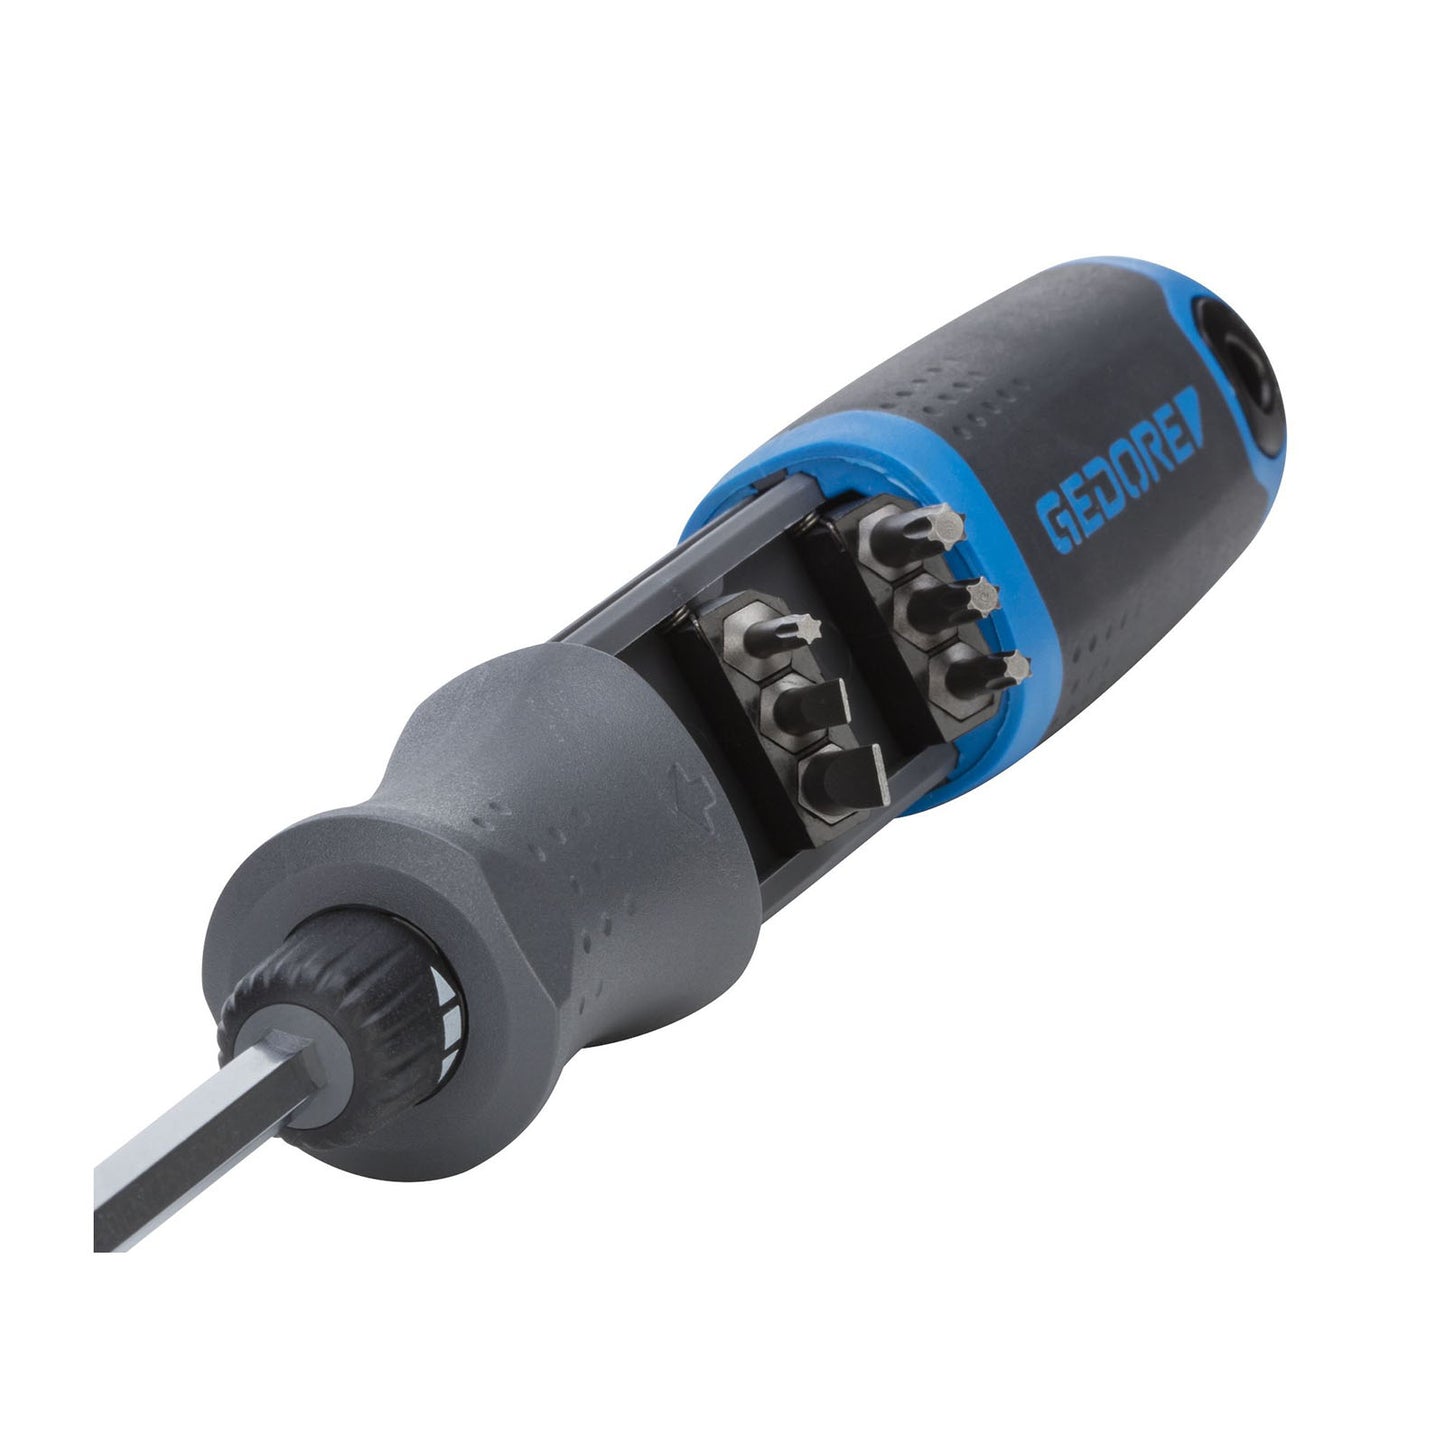 GEDORE 2169-012 - Screwdriver with reservoir (3031691)